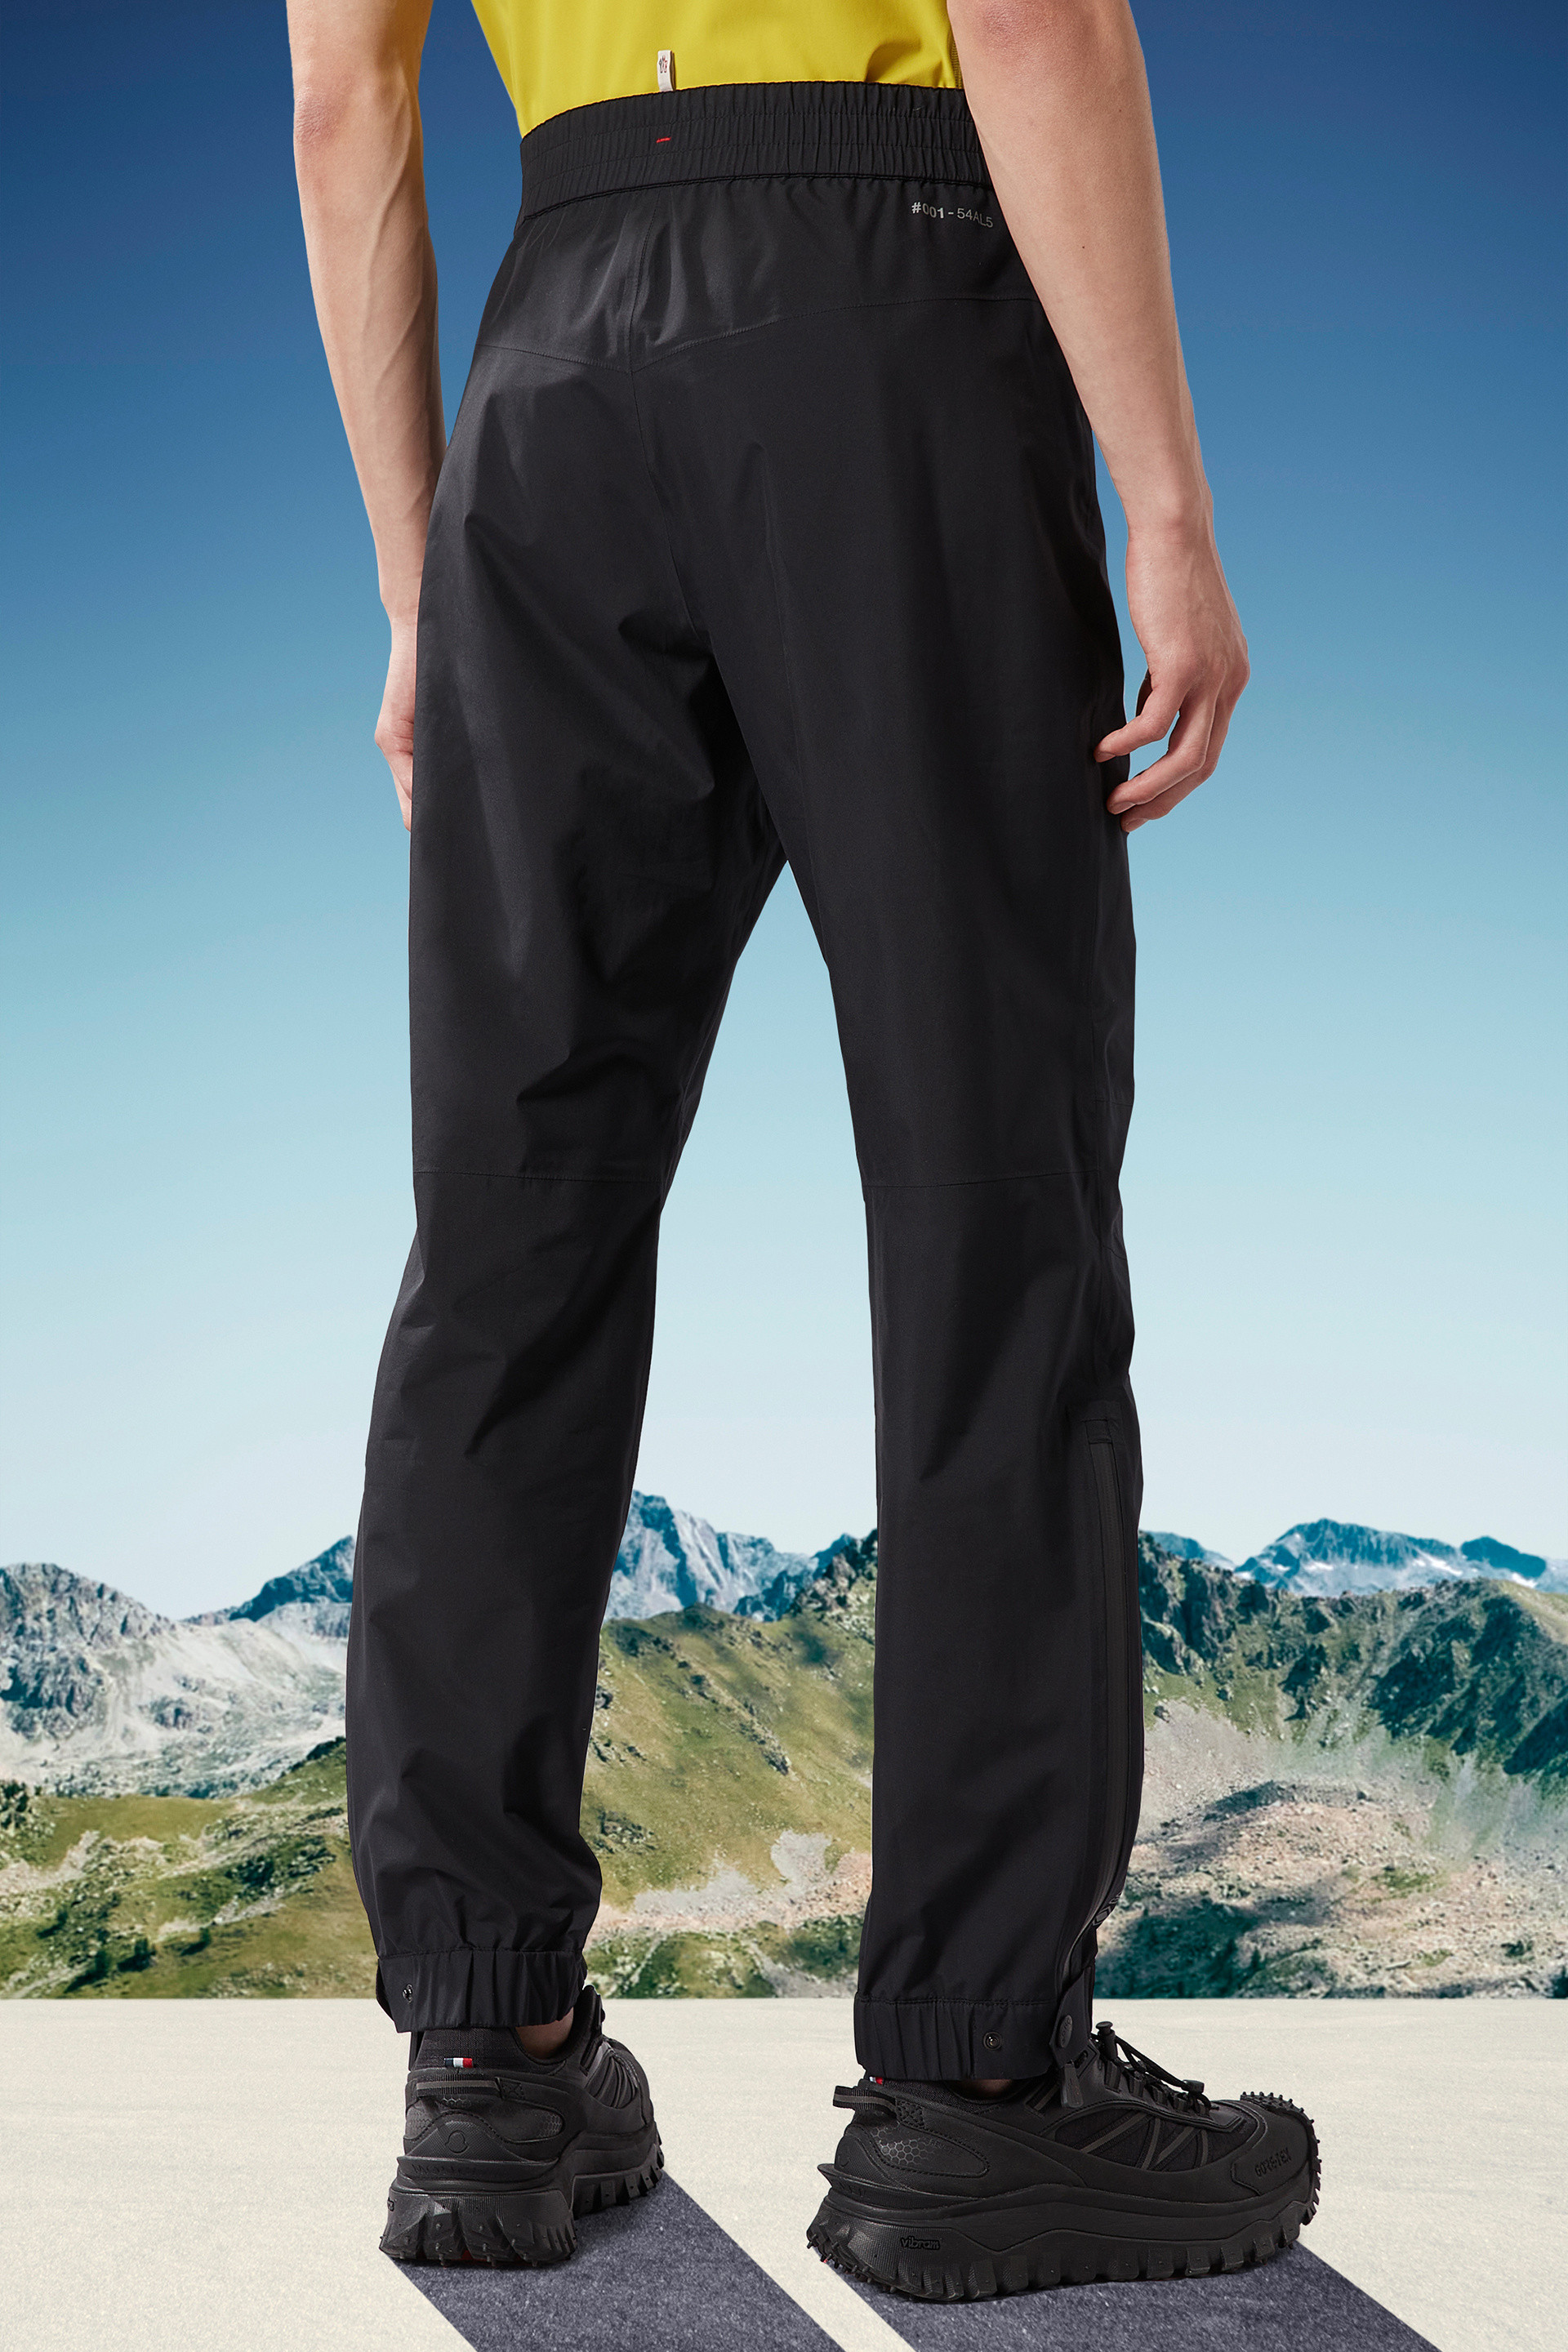 Mountain Equipment Spectre Trousers Review  Mpora